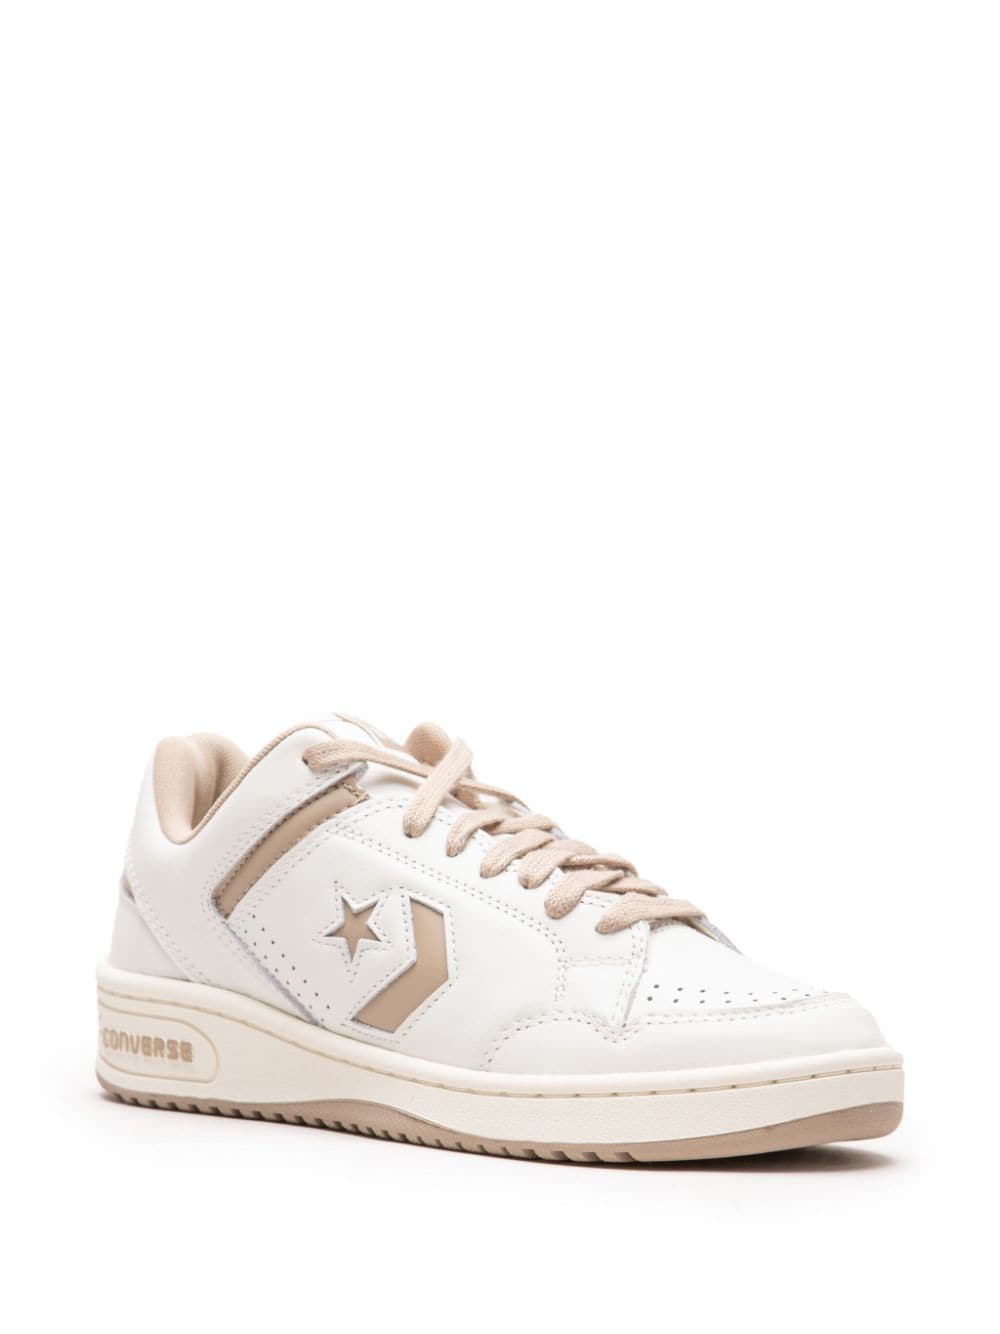 Converse Weapon leather sneakers - Wit